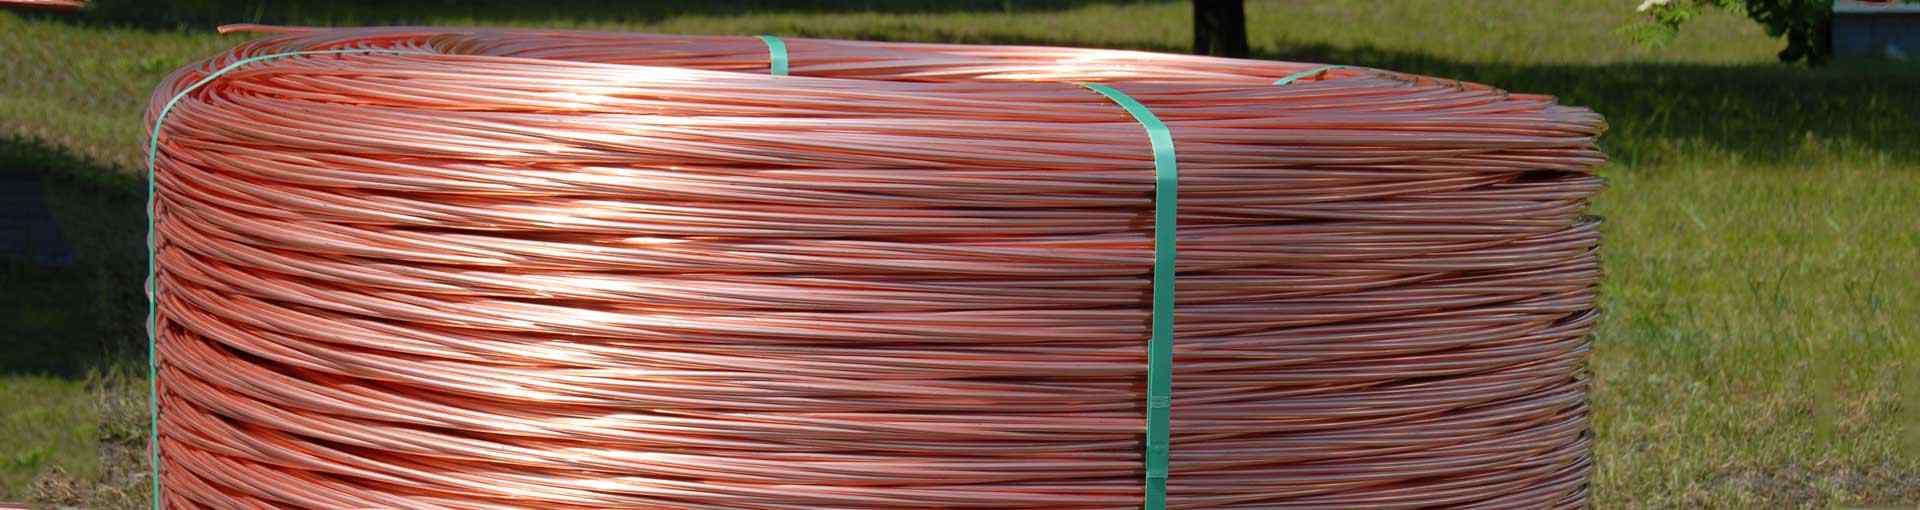 Advantages And Disadvantages Of Copper Wires